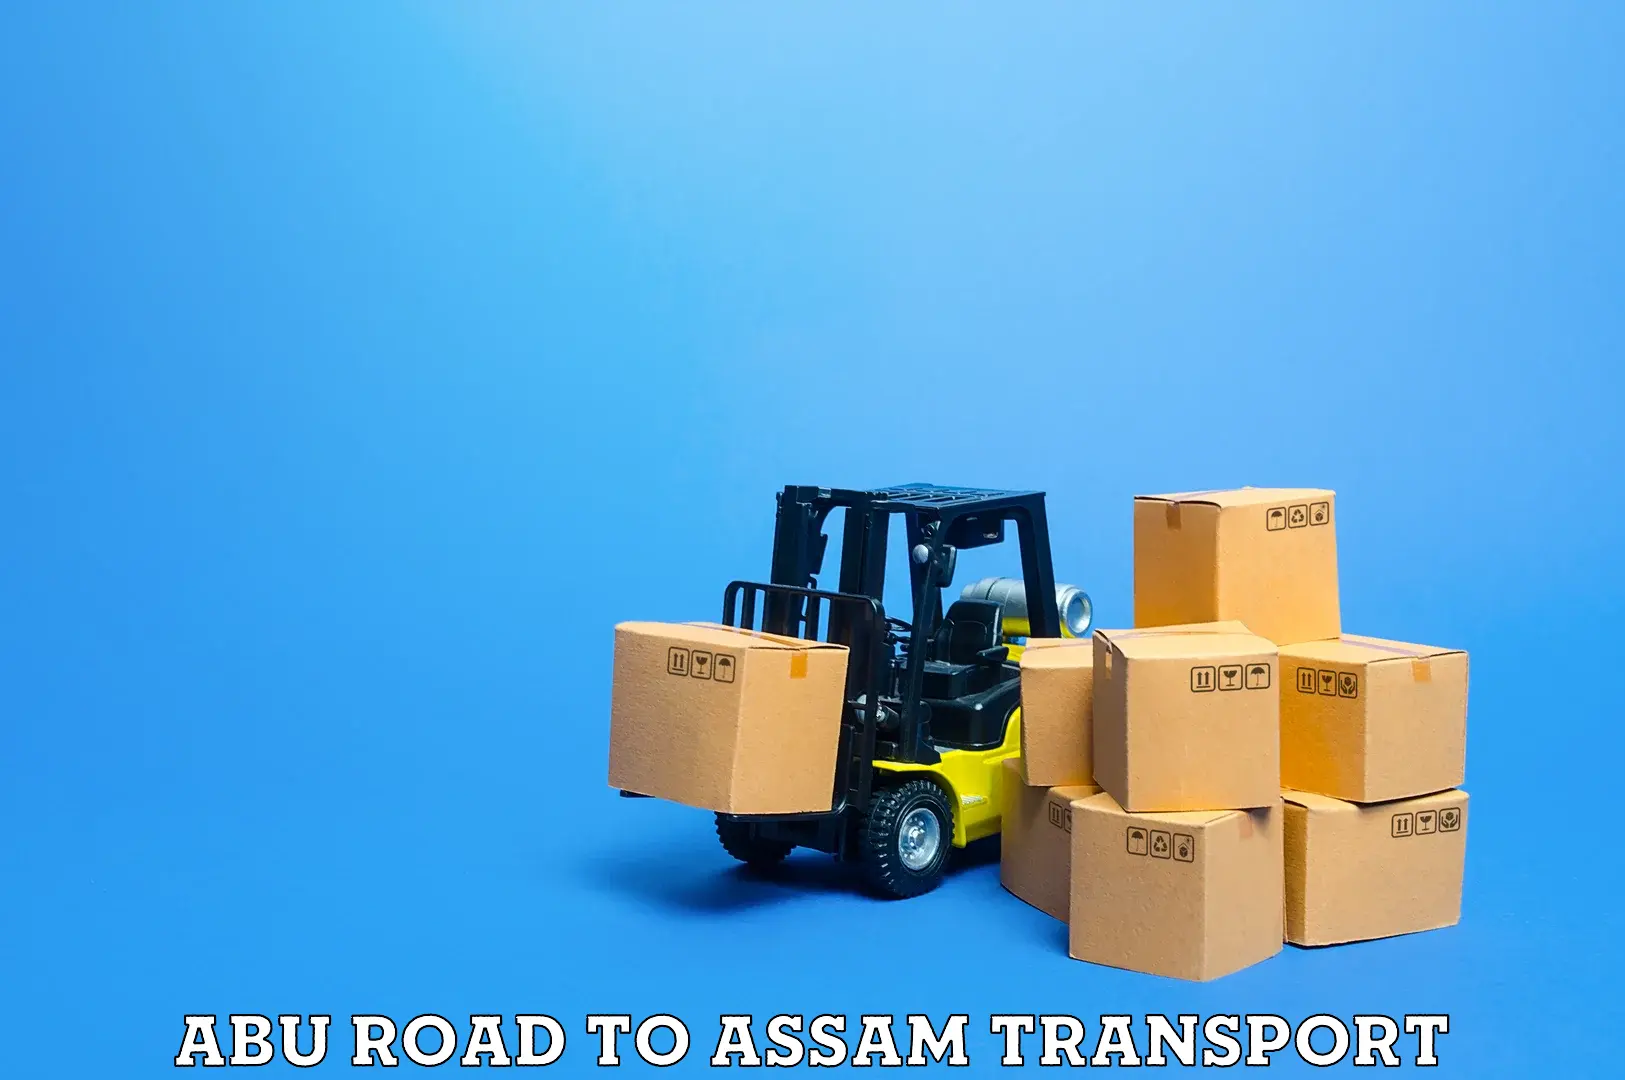 Daily transport service Abu Road to Assam